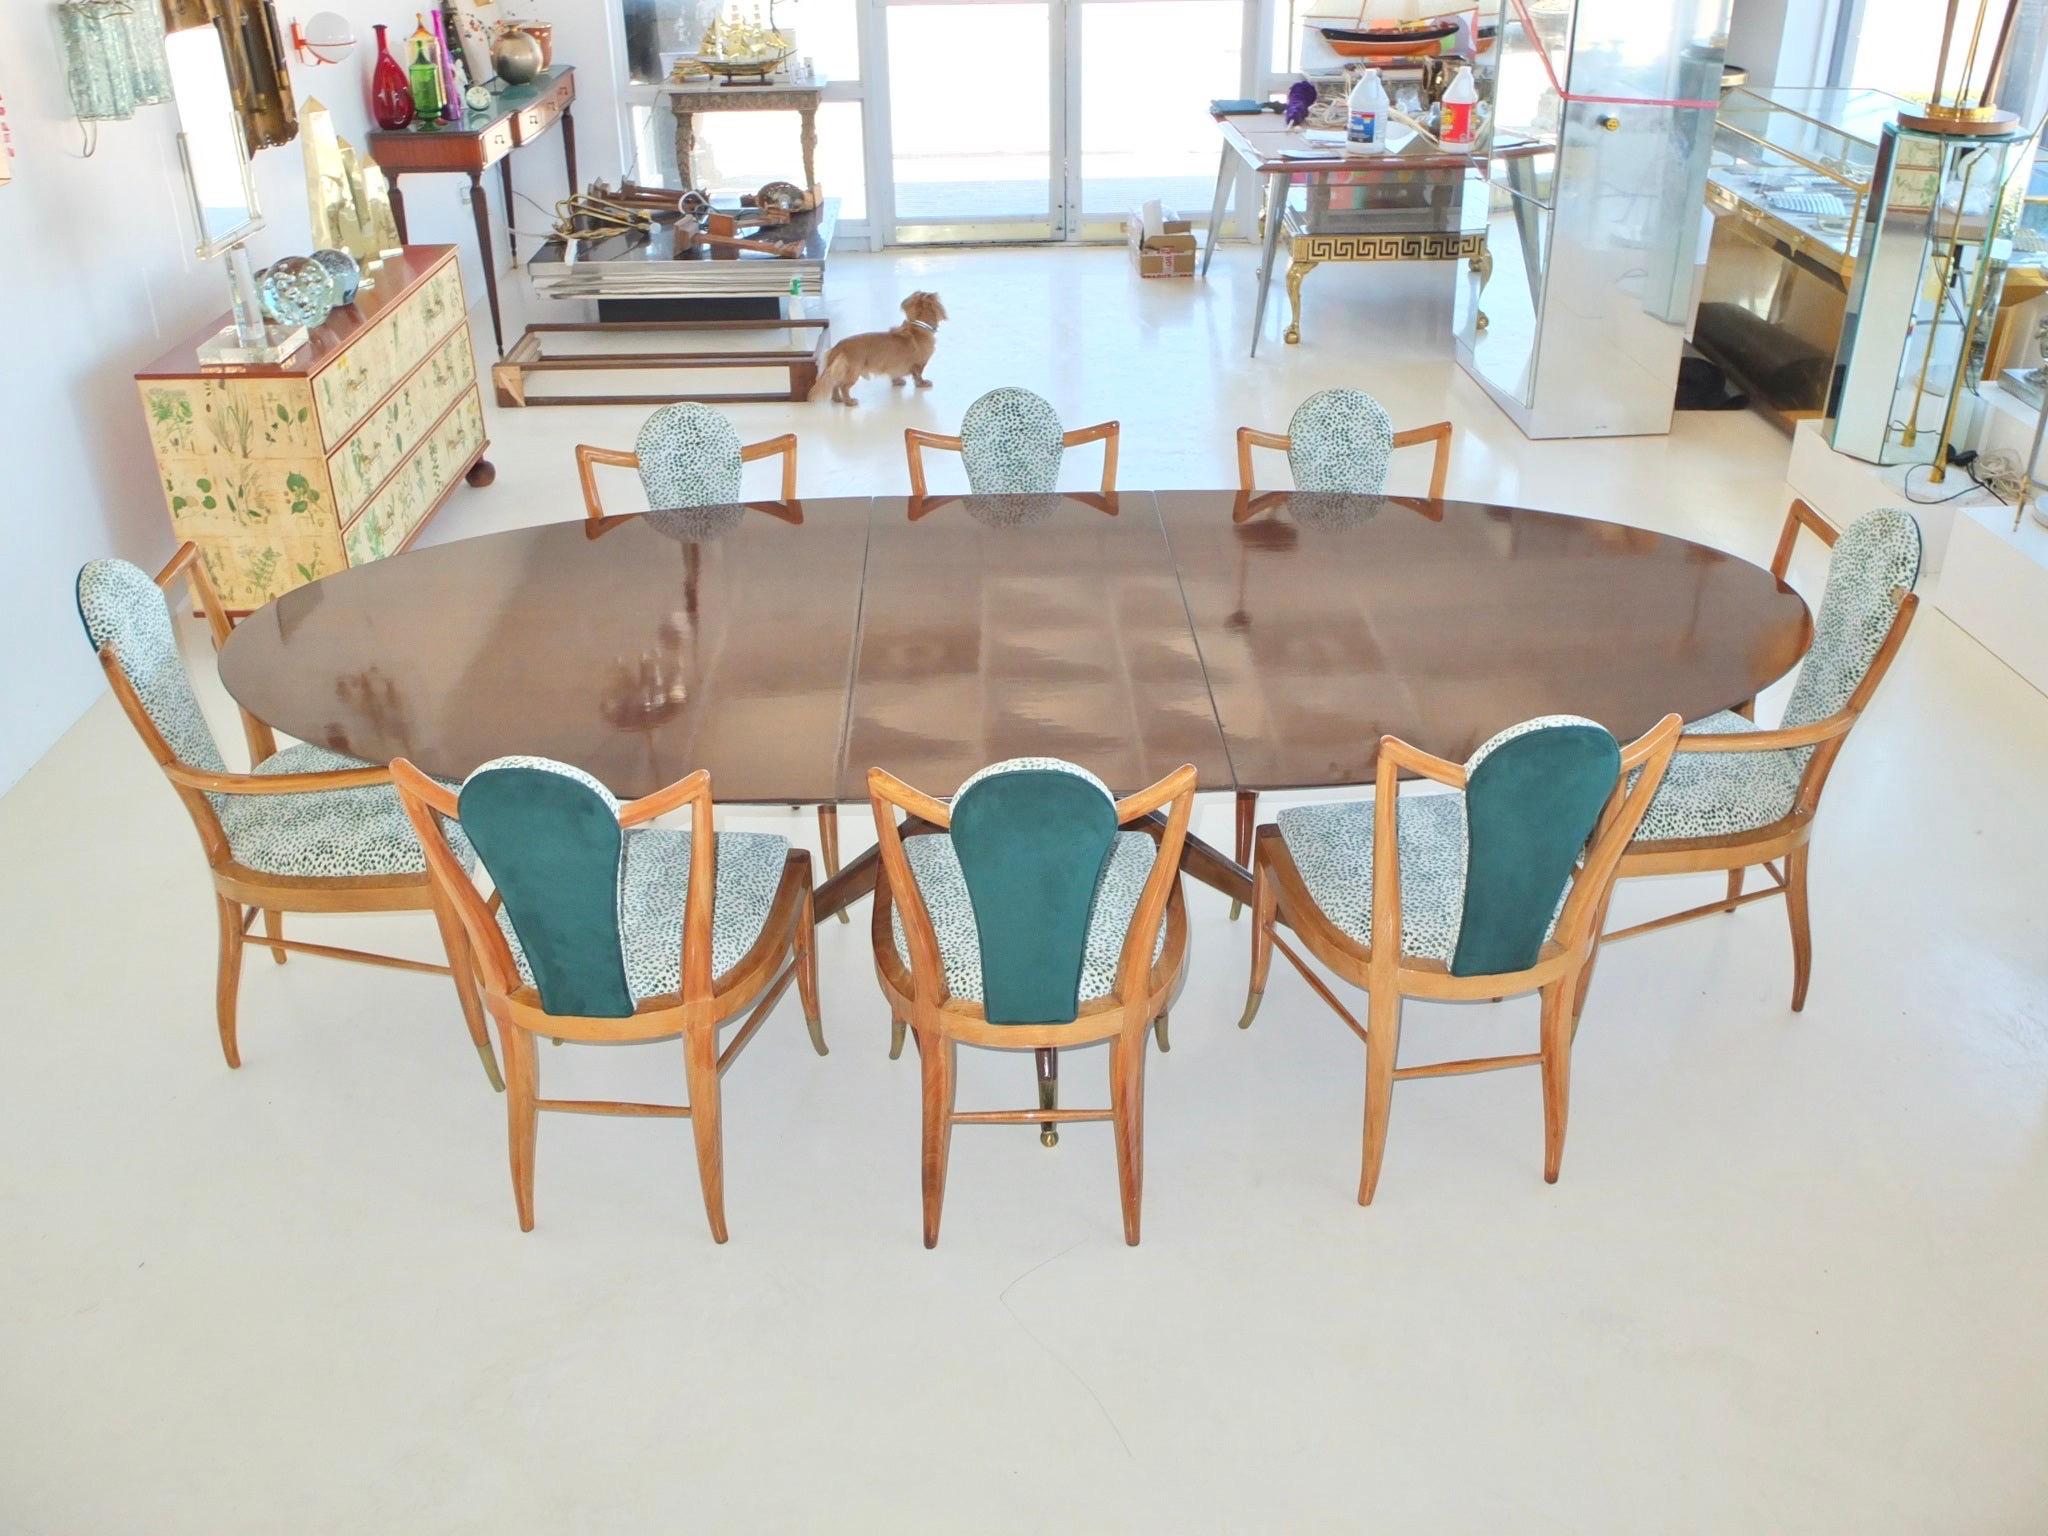 SINCE POSTING THIS LISTING WE HAVE ACQUIRED AN ADDITIONAL SET OF EIGHT CHAIRS FOR A TOTAL OF 16. The second set is in a darker finish but all can be refinished to match or simply use as a contrasting set.

Sculptural dining chairs with strong lines